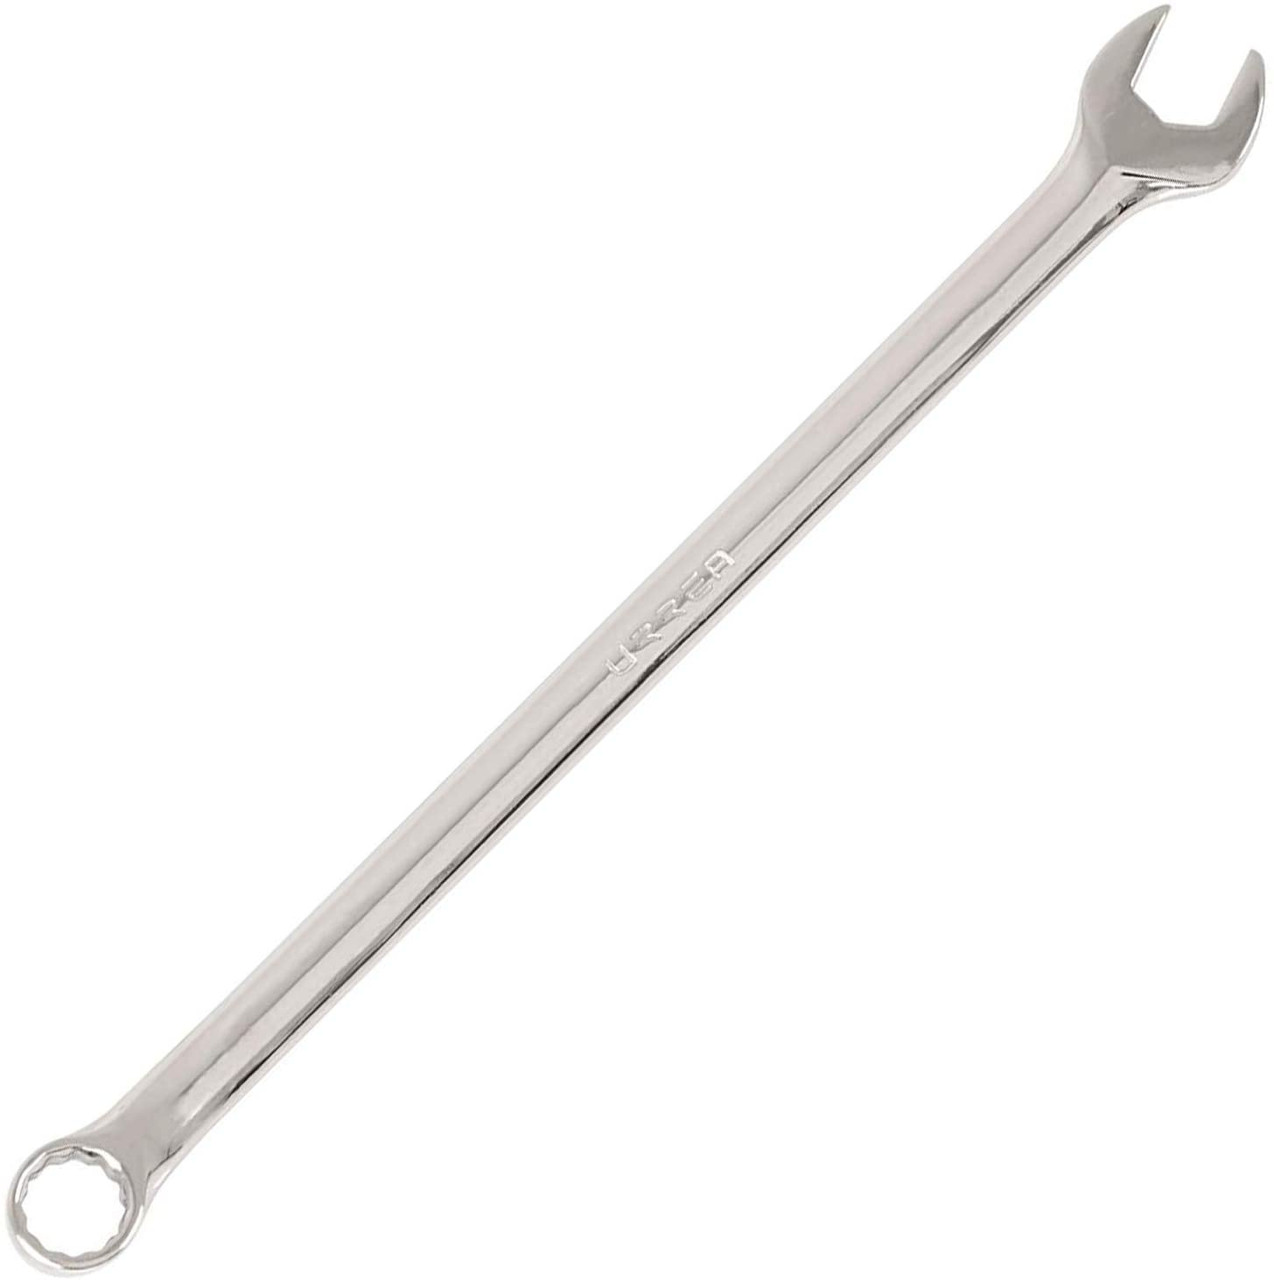 Full polished  Extra Long combination wrench, Size: 10mm, 12 point, Total Length: 8"